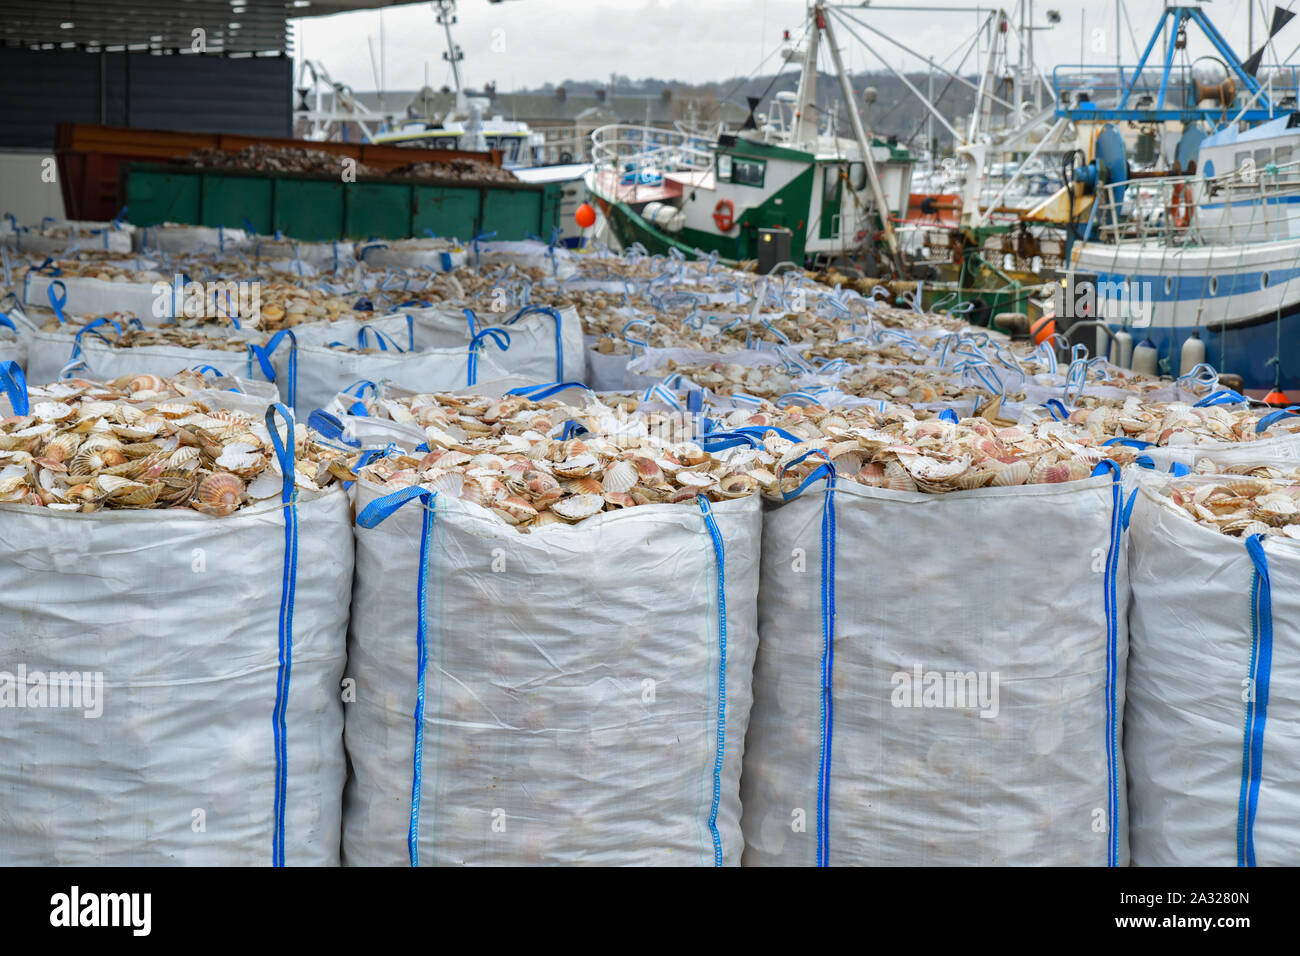 Bags with empty scallop shell for processing and boats for catching scallops Stock Photo